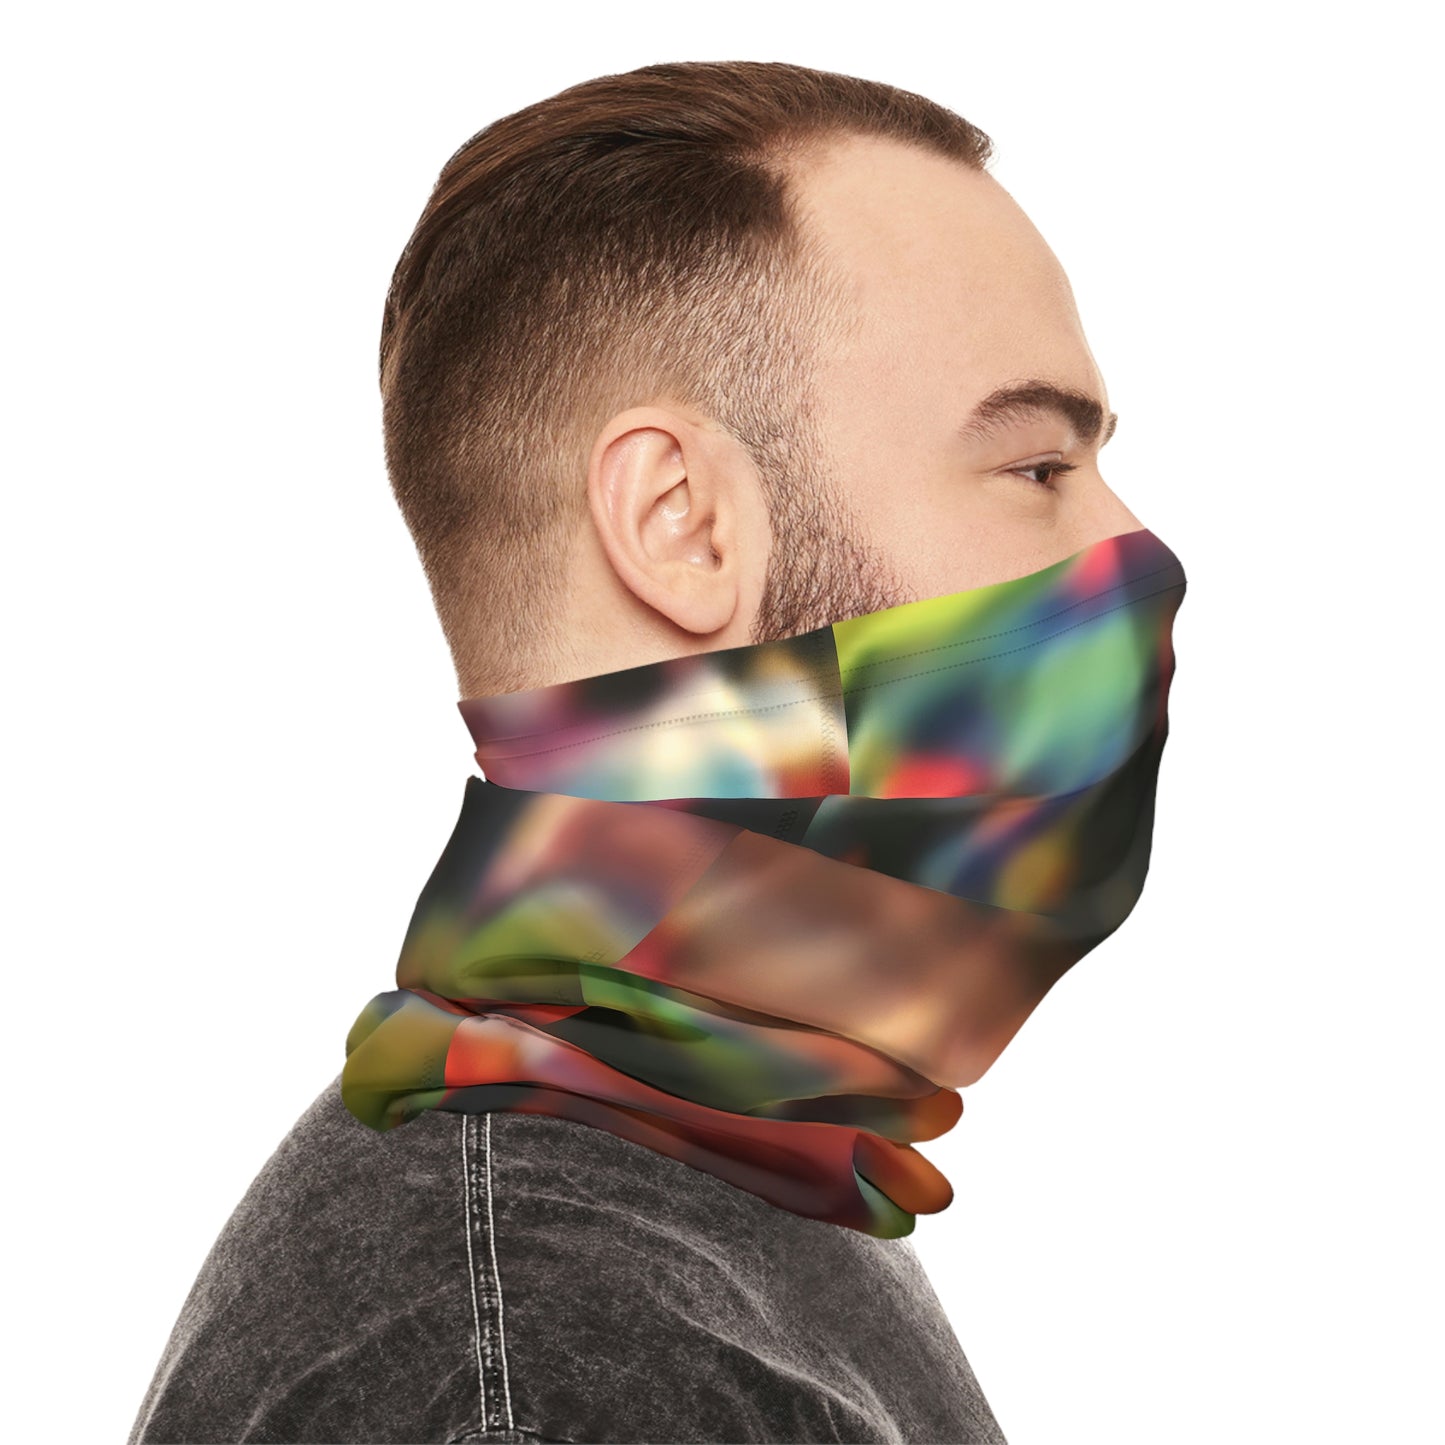 Adversarial Pattern Anti Facial recognition / Midweight Neck Gaiter